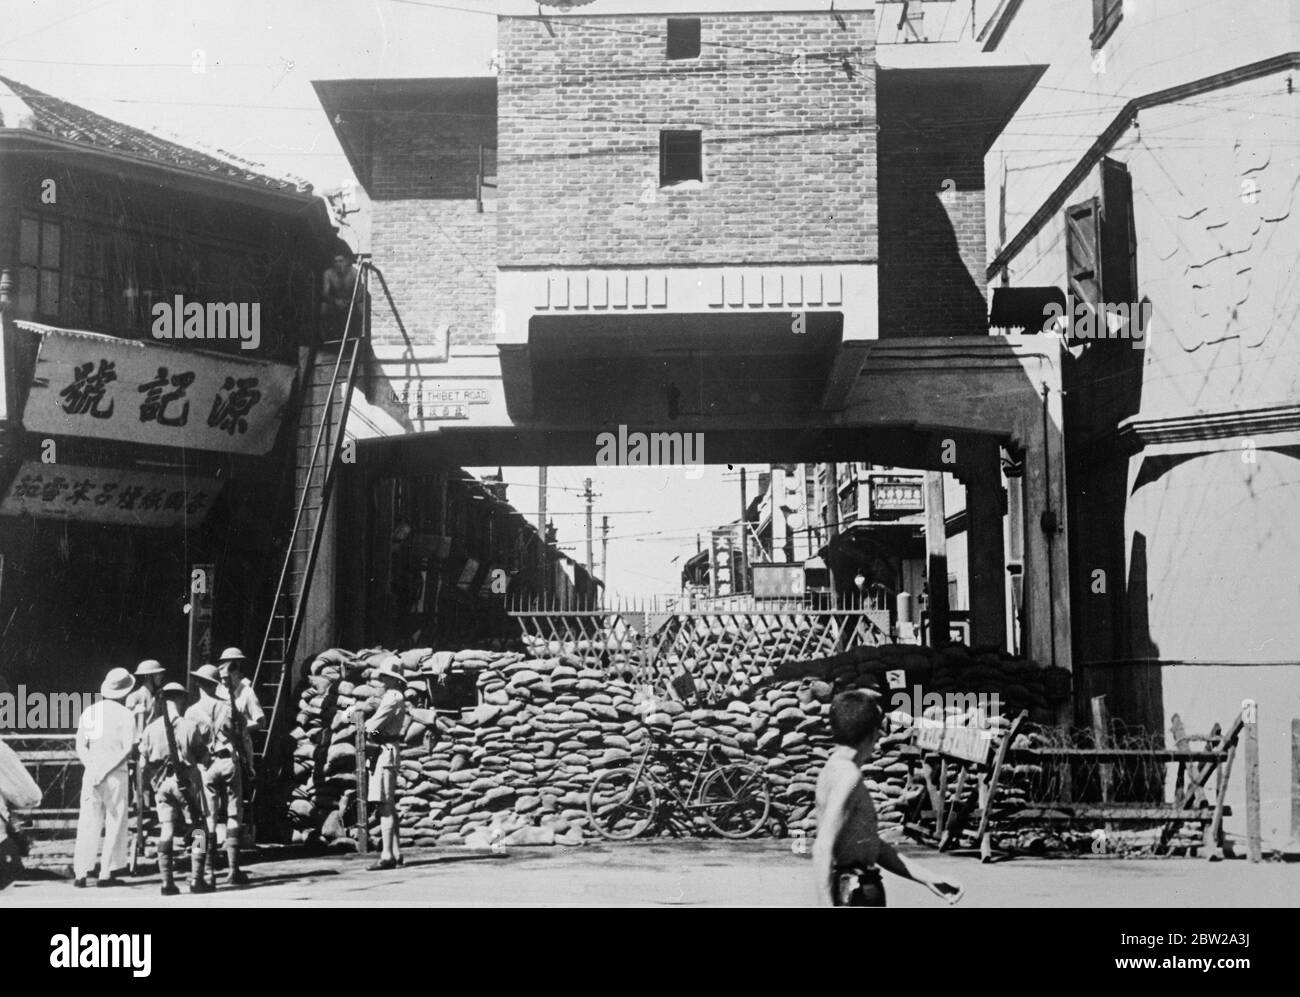 British blockhouse endangered as Japanese besiege Chinese 'doomed battlelion'in Shanghai. This picture, just received in London, shows, the British blockhouse held by the Welsh Fusiliers in north Thibet road, Shanghai, almost on top of the warehouse where the Chinese 'doomed battlelion', a refuse to retreat, besieged by 40,000 Japanese. The Japanese commander has notified the British post that he intends to bomb the isolated Chinese from the air and burn down their warehouse. The British soldiers have posted farewell letters handed to them by the Chinese, and some reports state that the Britis Stock Photo